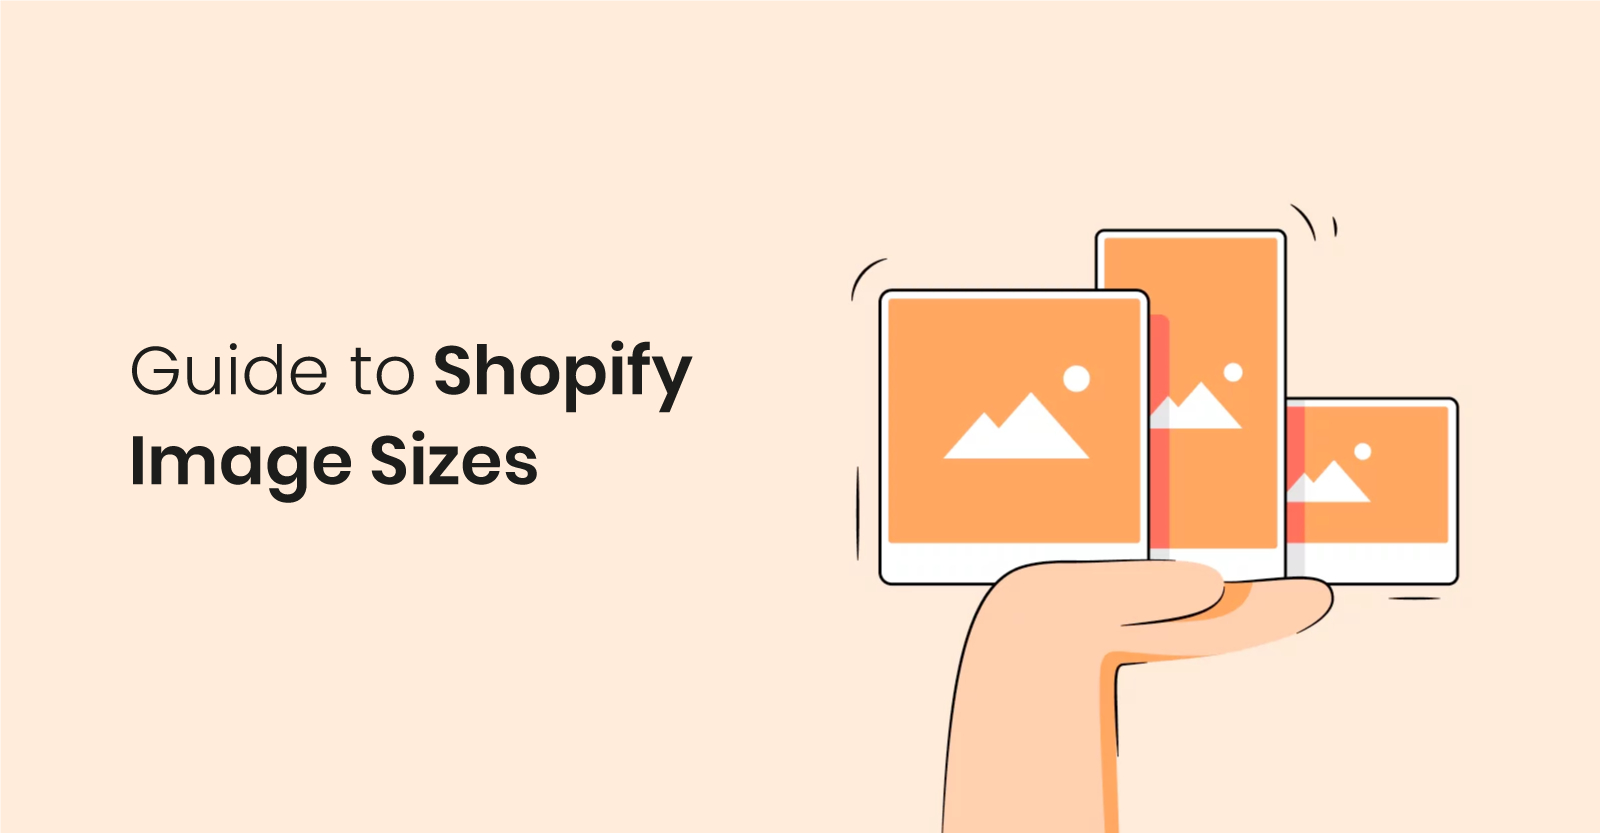 Guide to Shopify Image Sizes